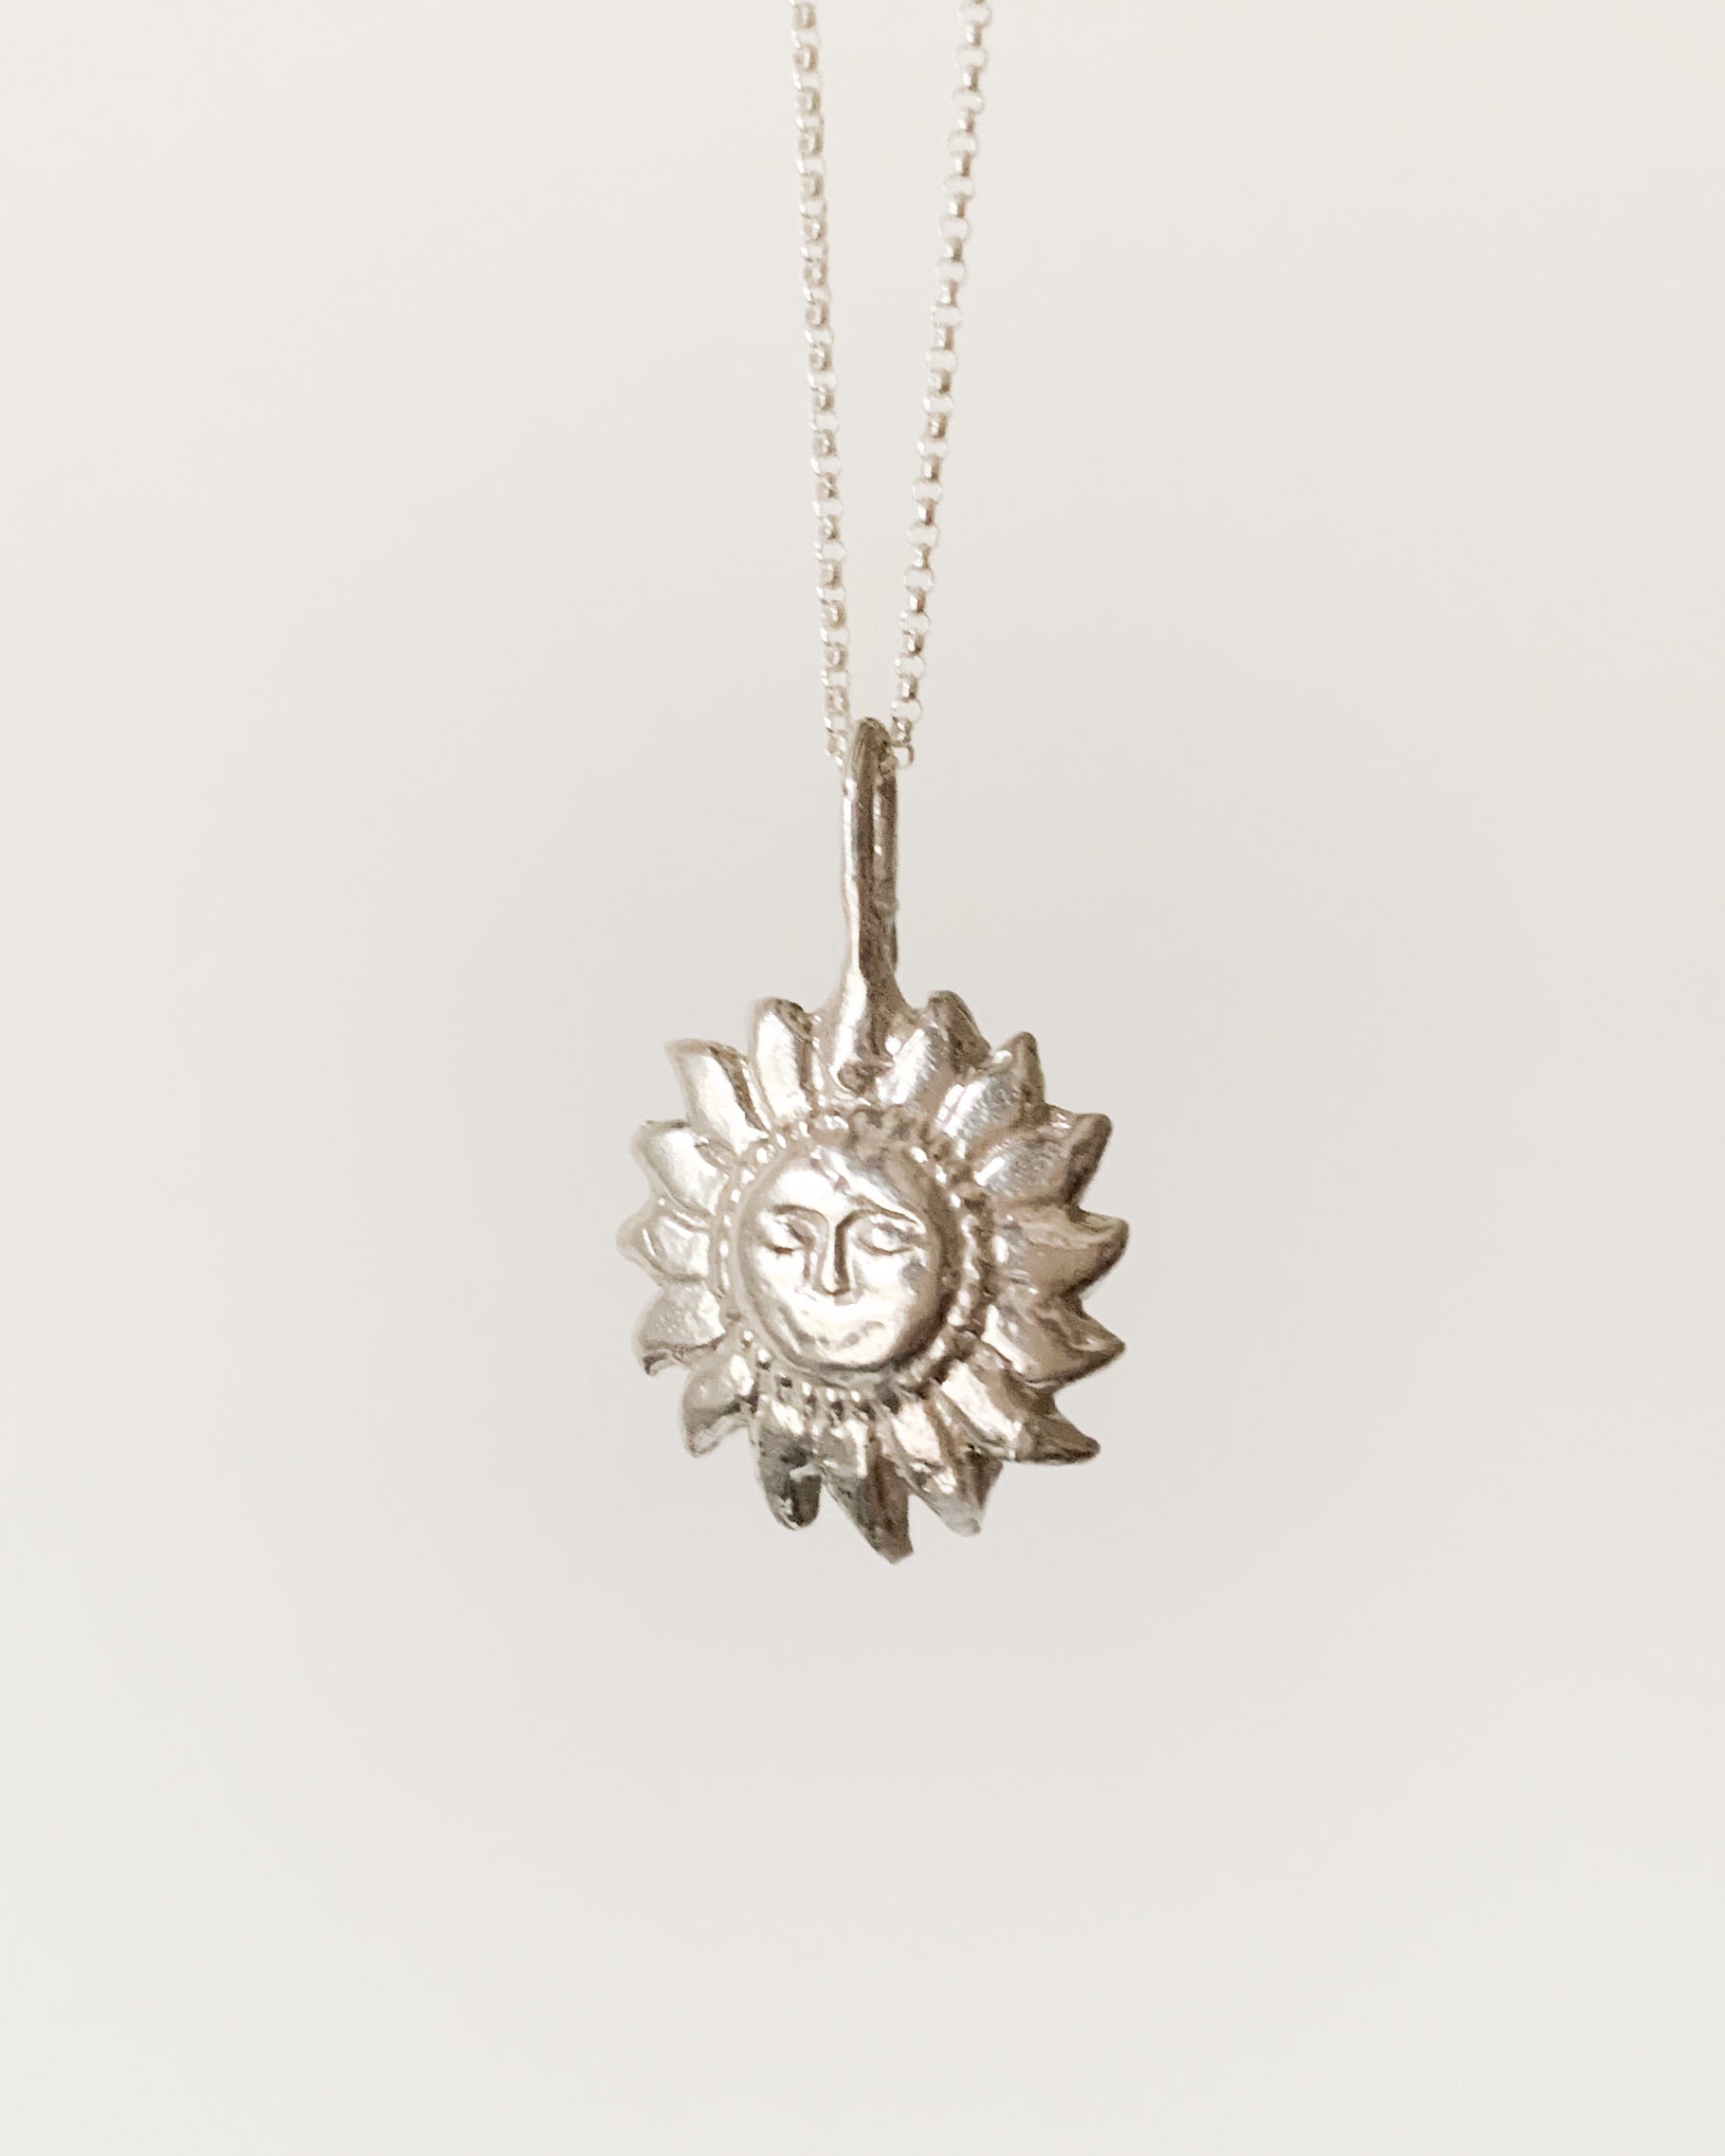 a silver sun shaped pendant necklace on a silver chain, shown on a white background